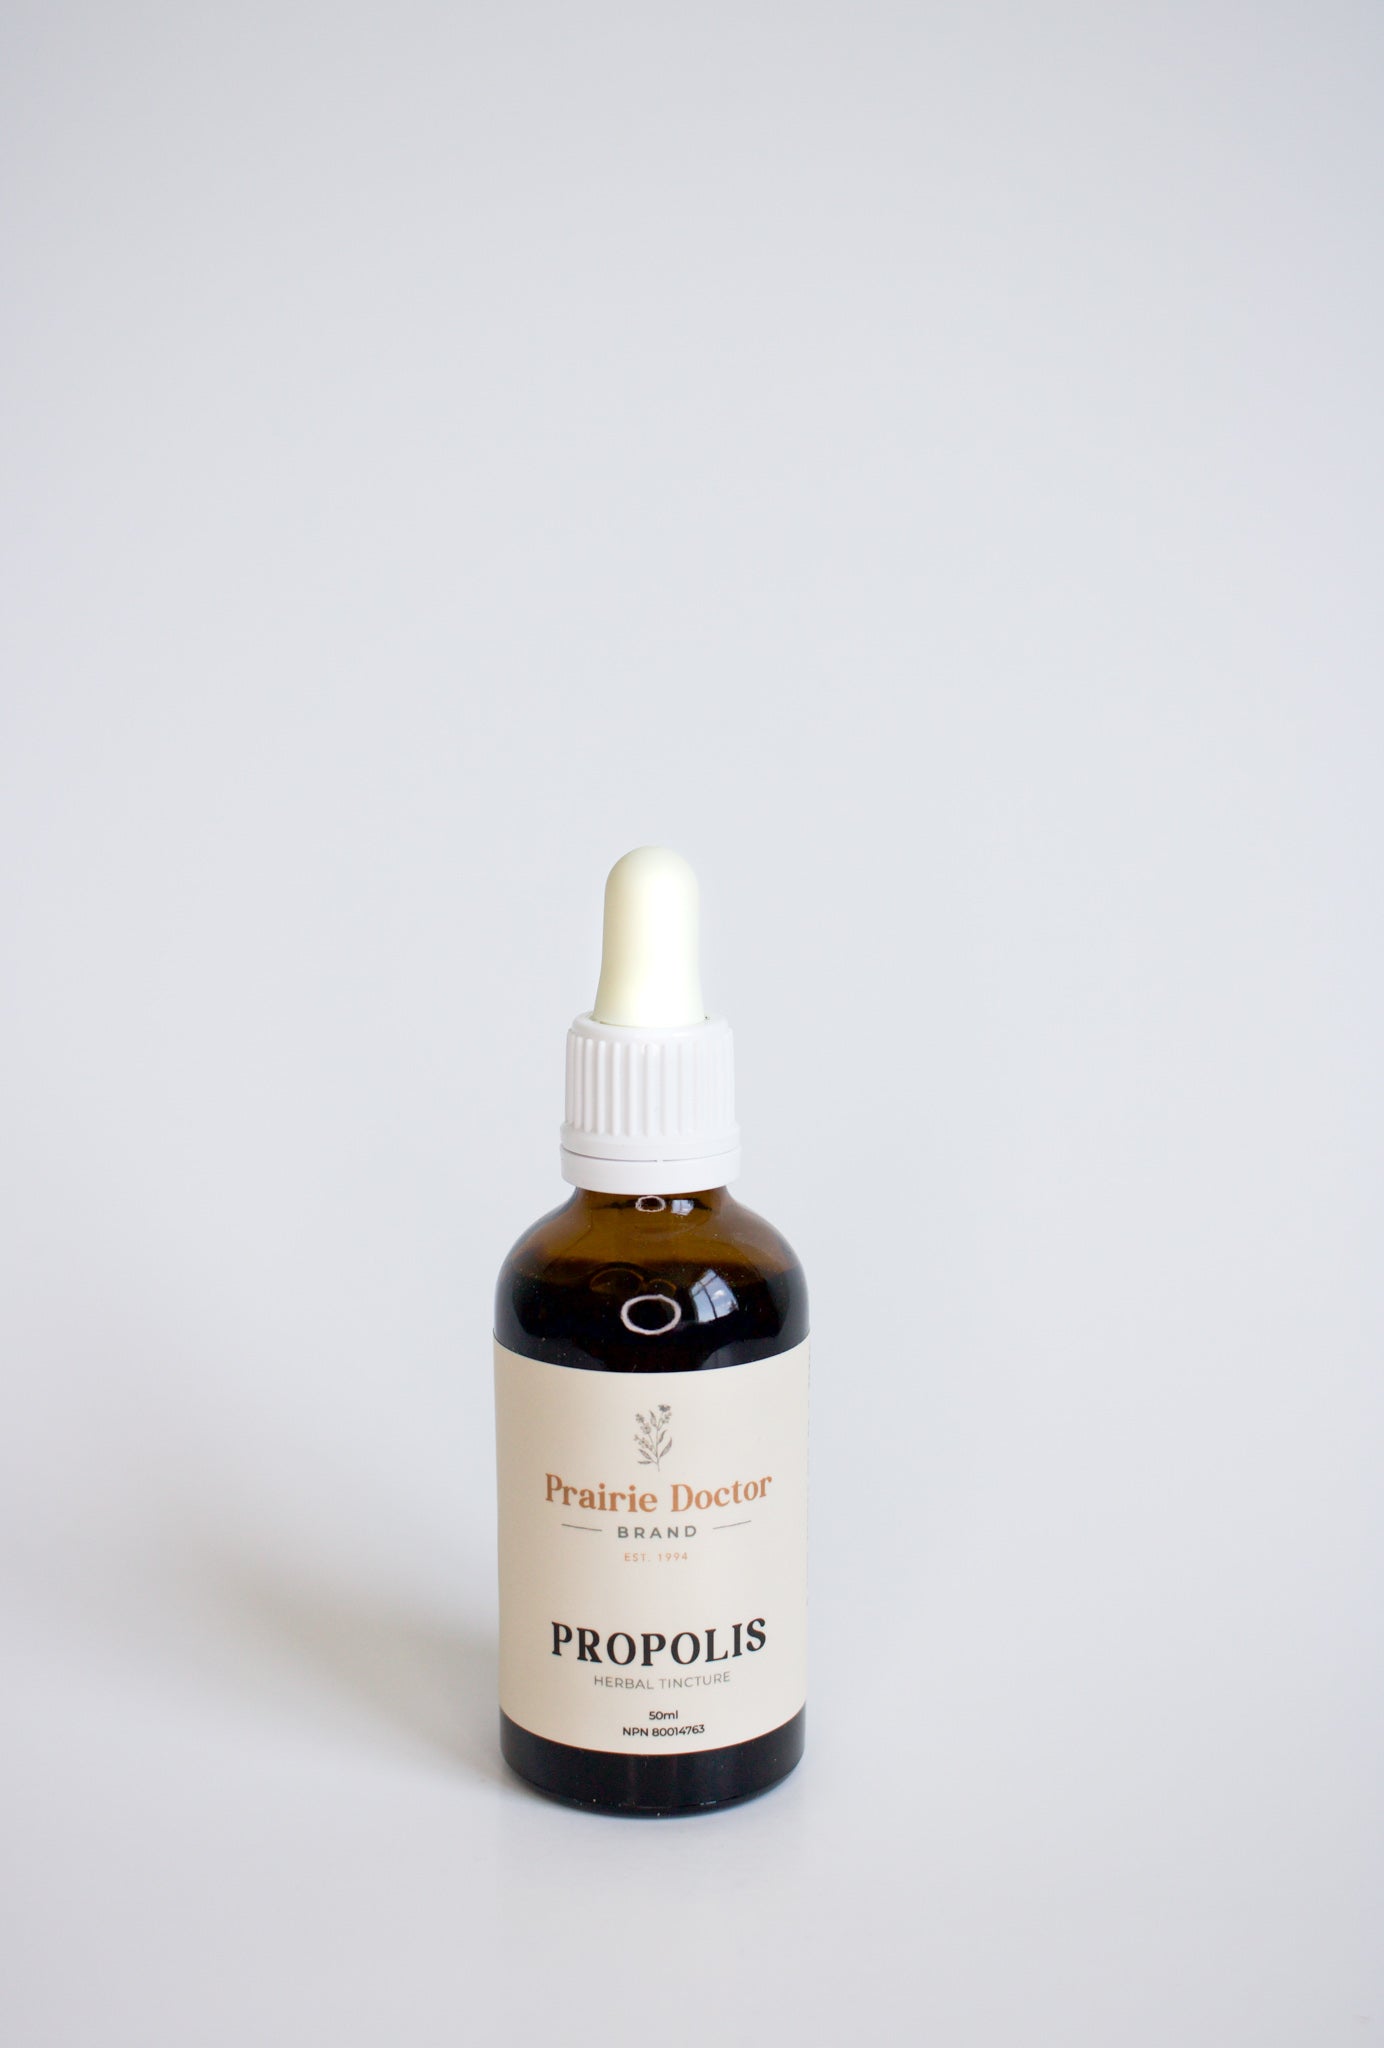 Our lab tested Propolis herbal tincture is made using 100% natural propolis that is lab tested for purity and potency, ensuring the highest quality Propolis herbal tincture possible!